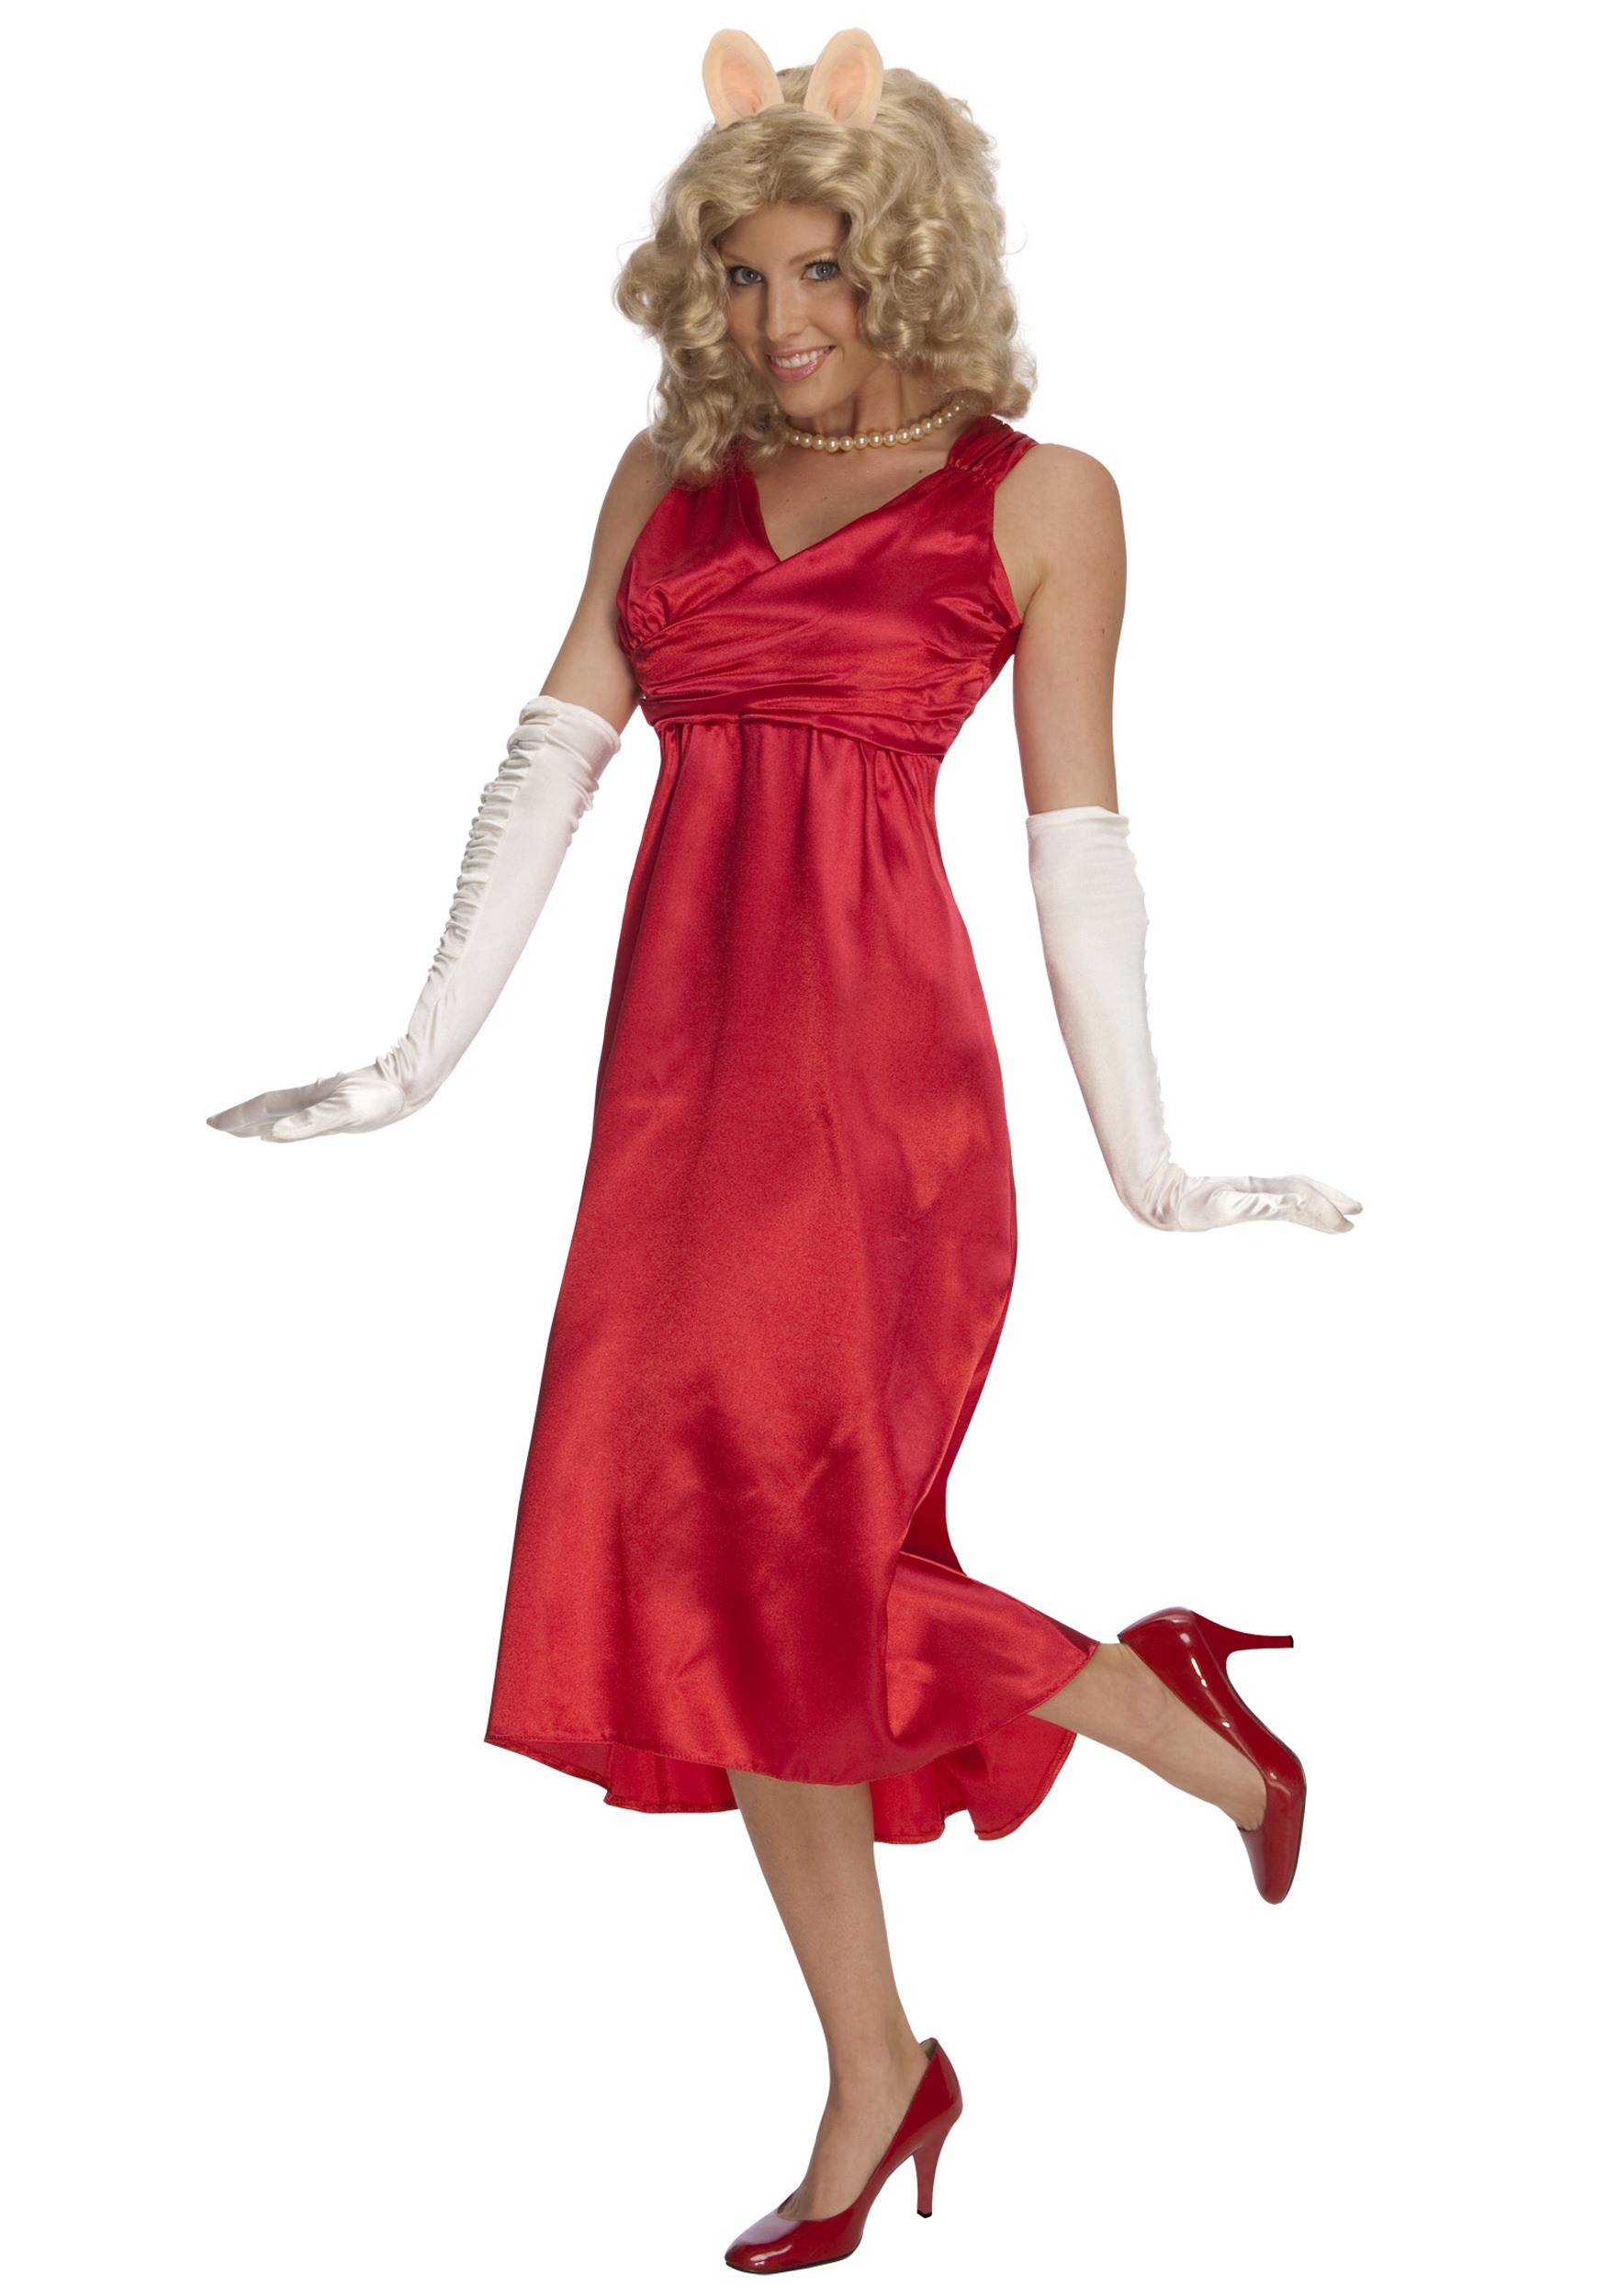 Adult Miss Piggy Costume with Free Shipping in U.S., UK, Europe, Canada | O...